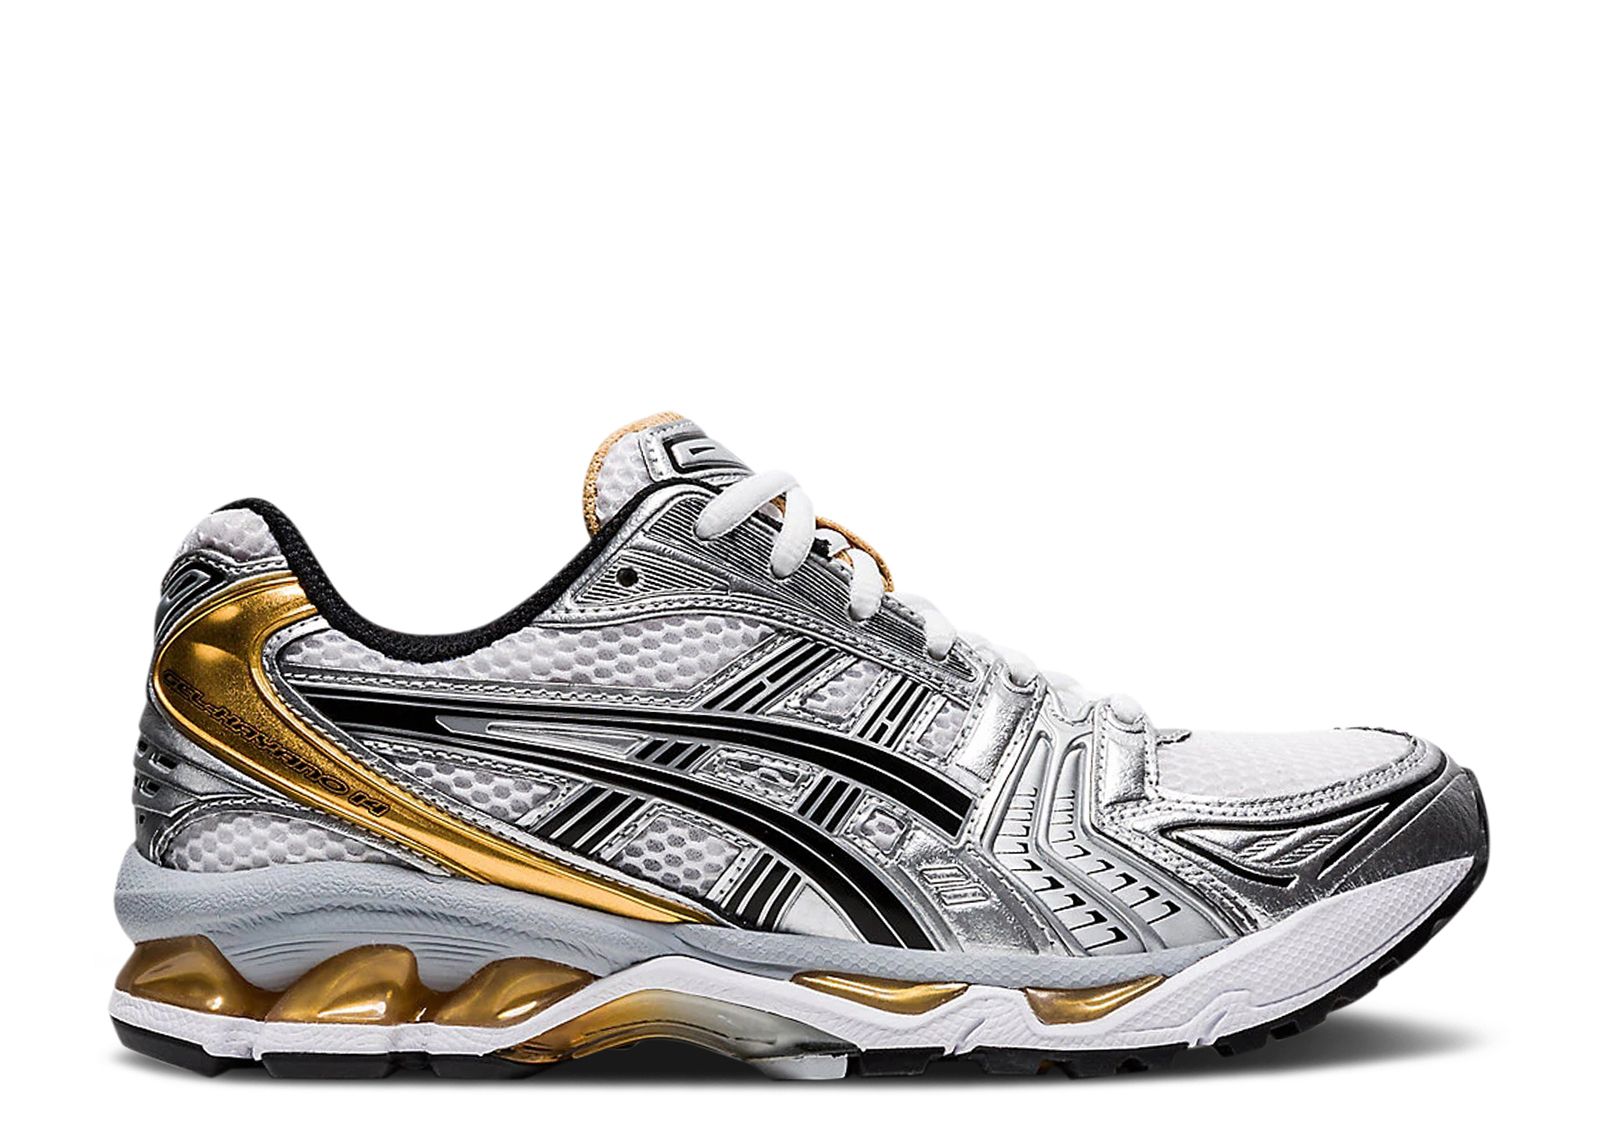 Wmns Gel Kayano 14 Pure Gold